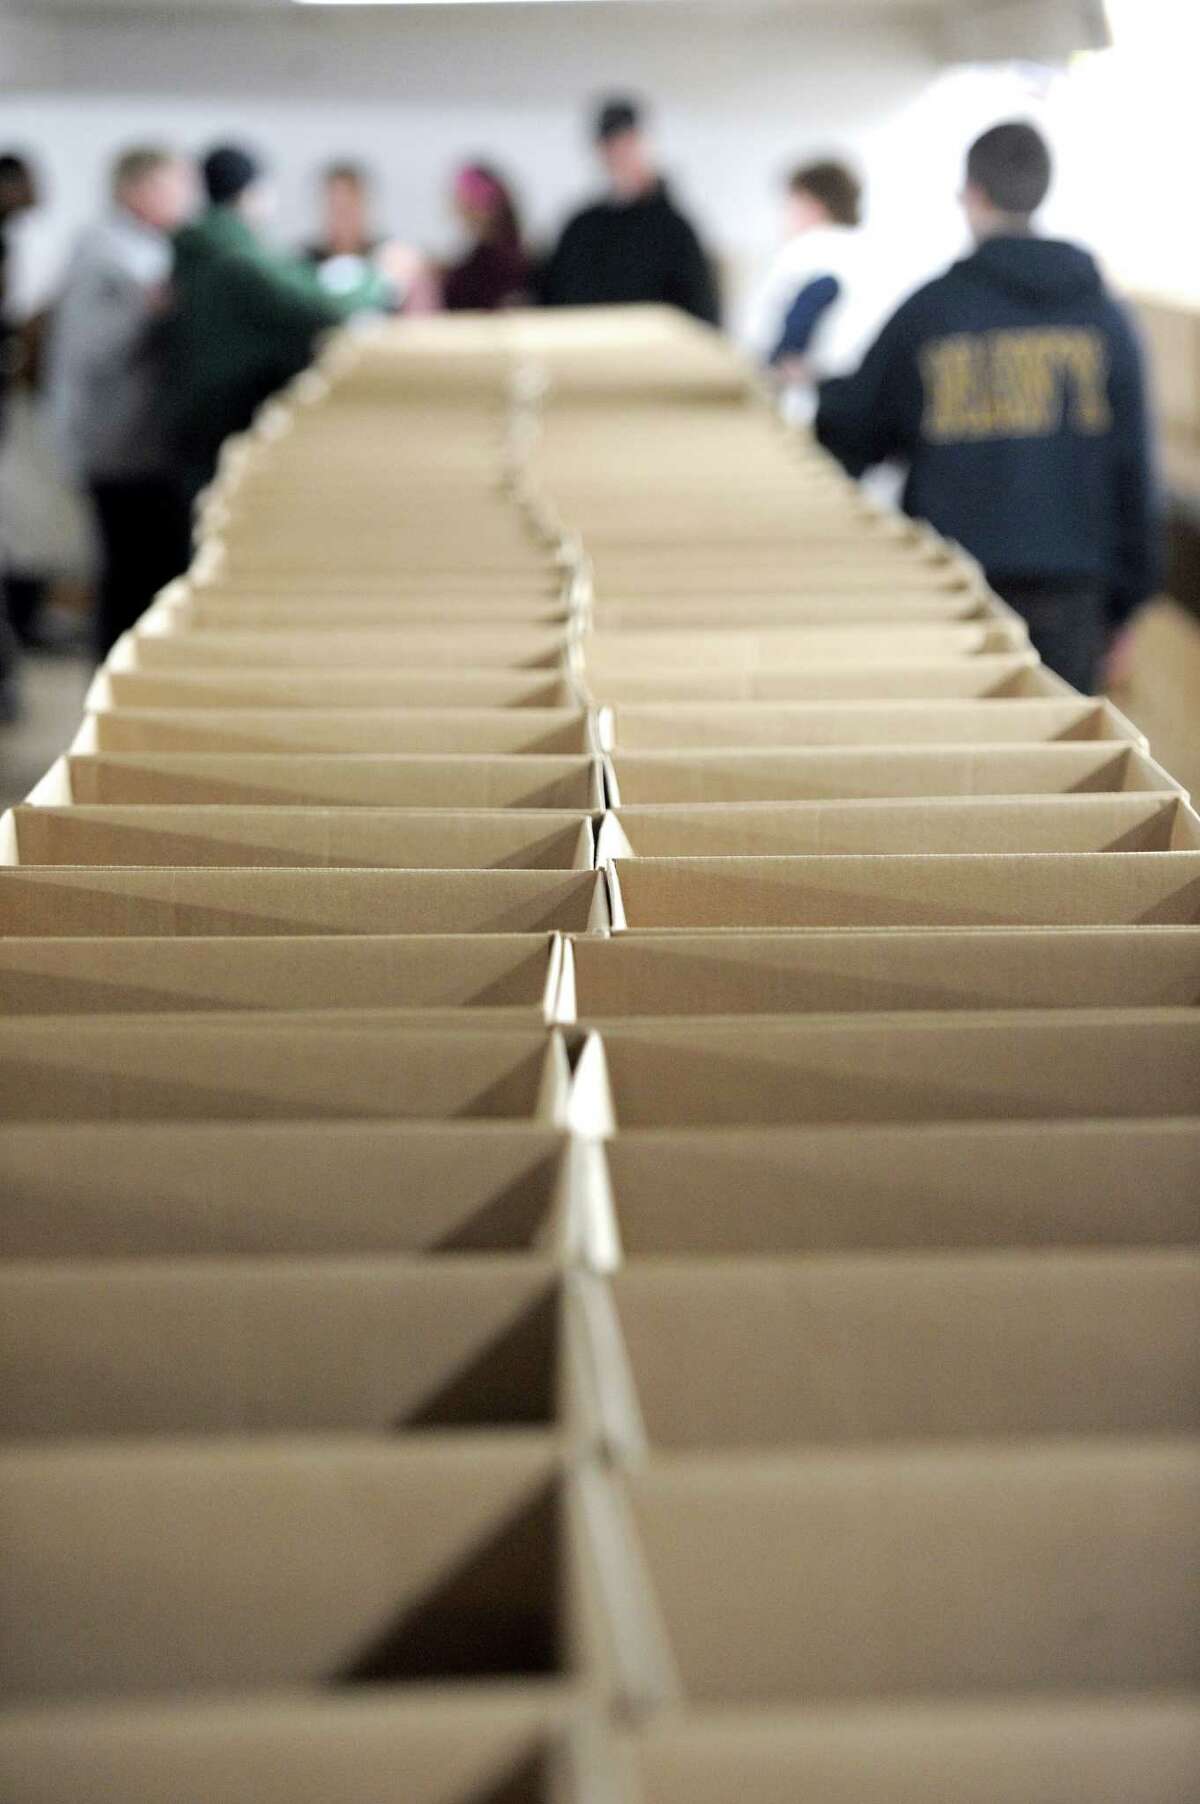 Boxes that will be filled with food and distributed by Brotherhood In Action for their Thanksgiving action week are assembled in a basement storage area in Bethel, Conn, on Tuesday, November 18, 2014.